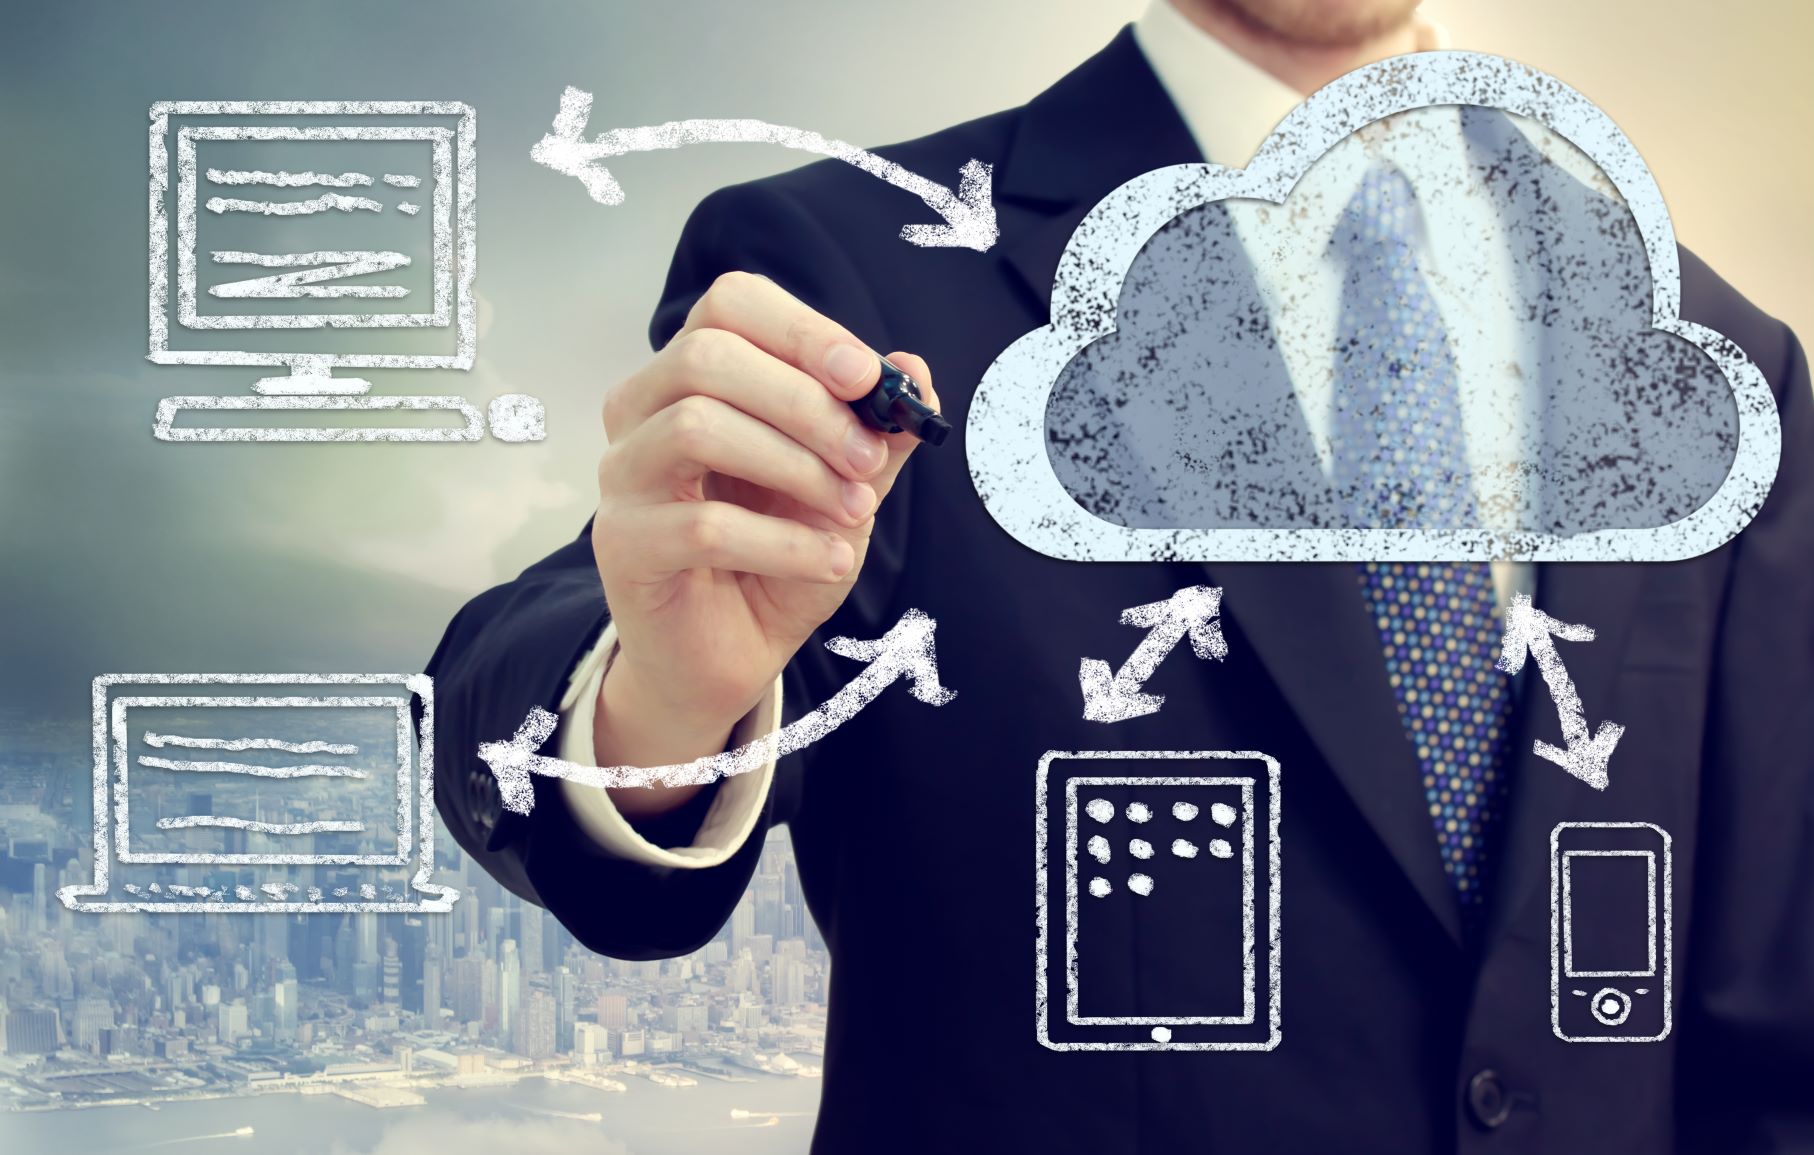 Having The Managed IT Services For Cloud Migration Consulting